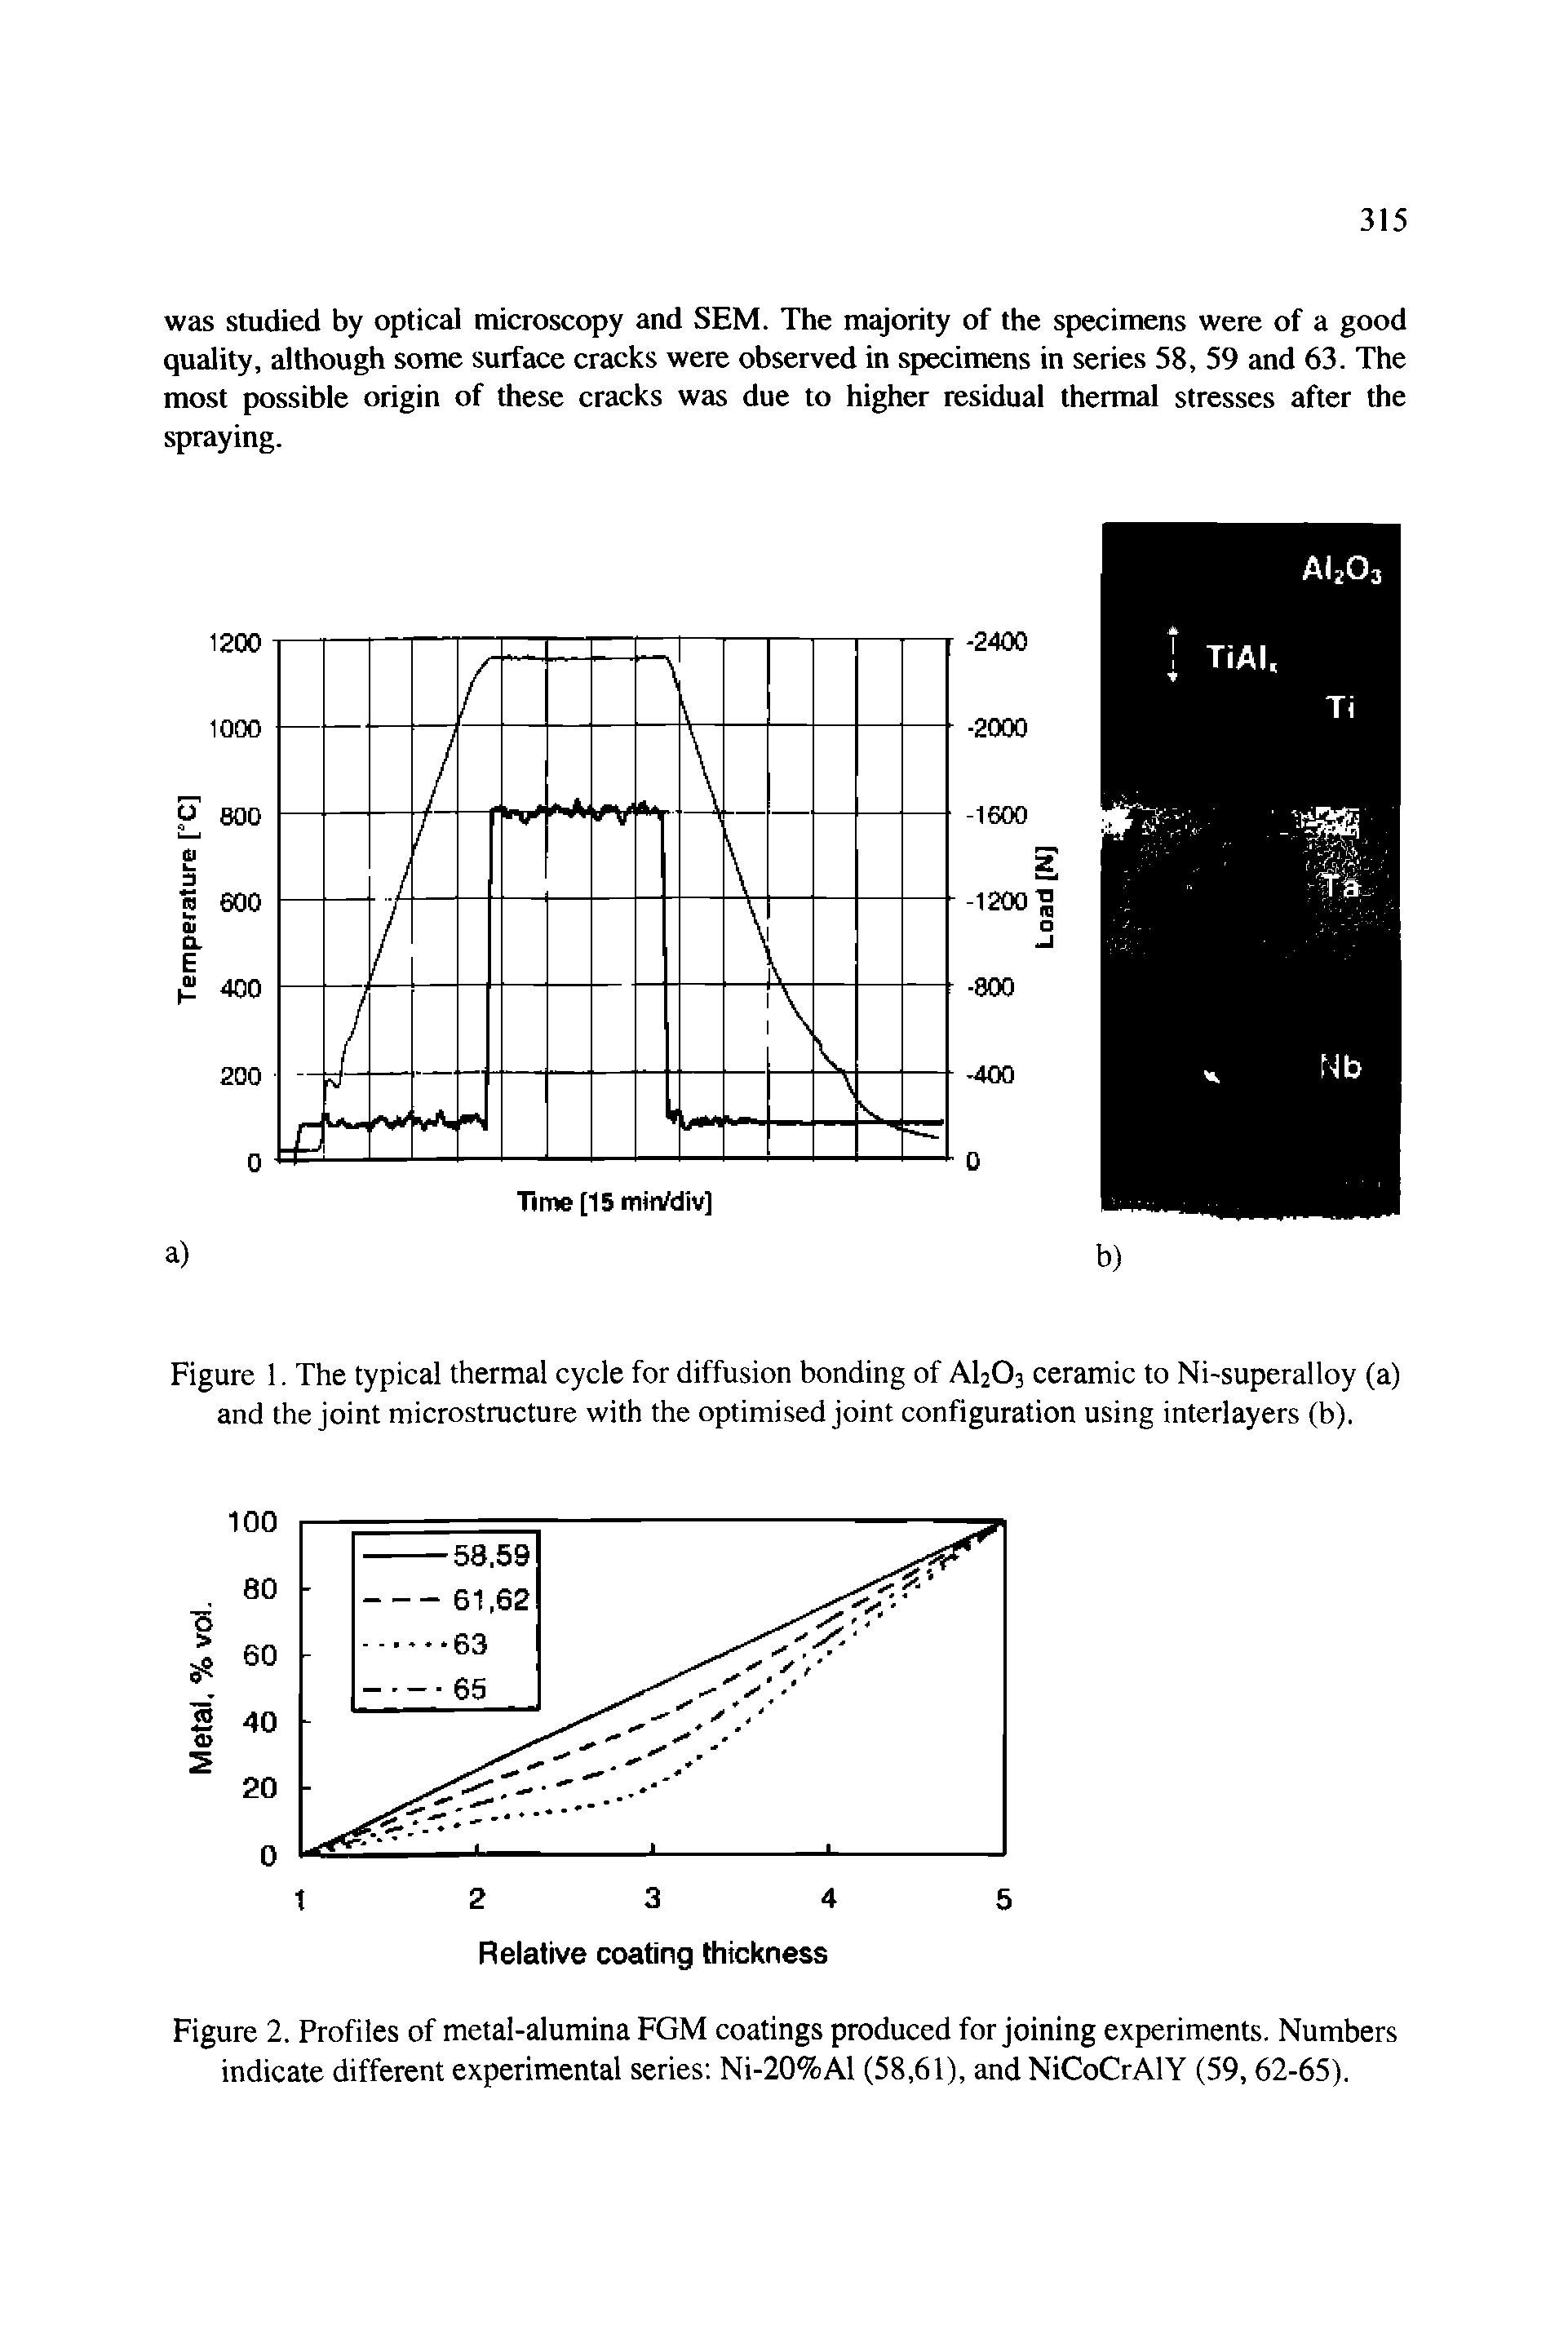 Figure 2. Profiles of metal-alumina FGM coatings produced for joining experiments. Numbers indicate different experimental series Ni-20%A1 (58,61), and NiCoCrAlY (59,62-65).